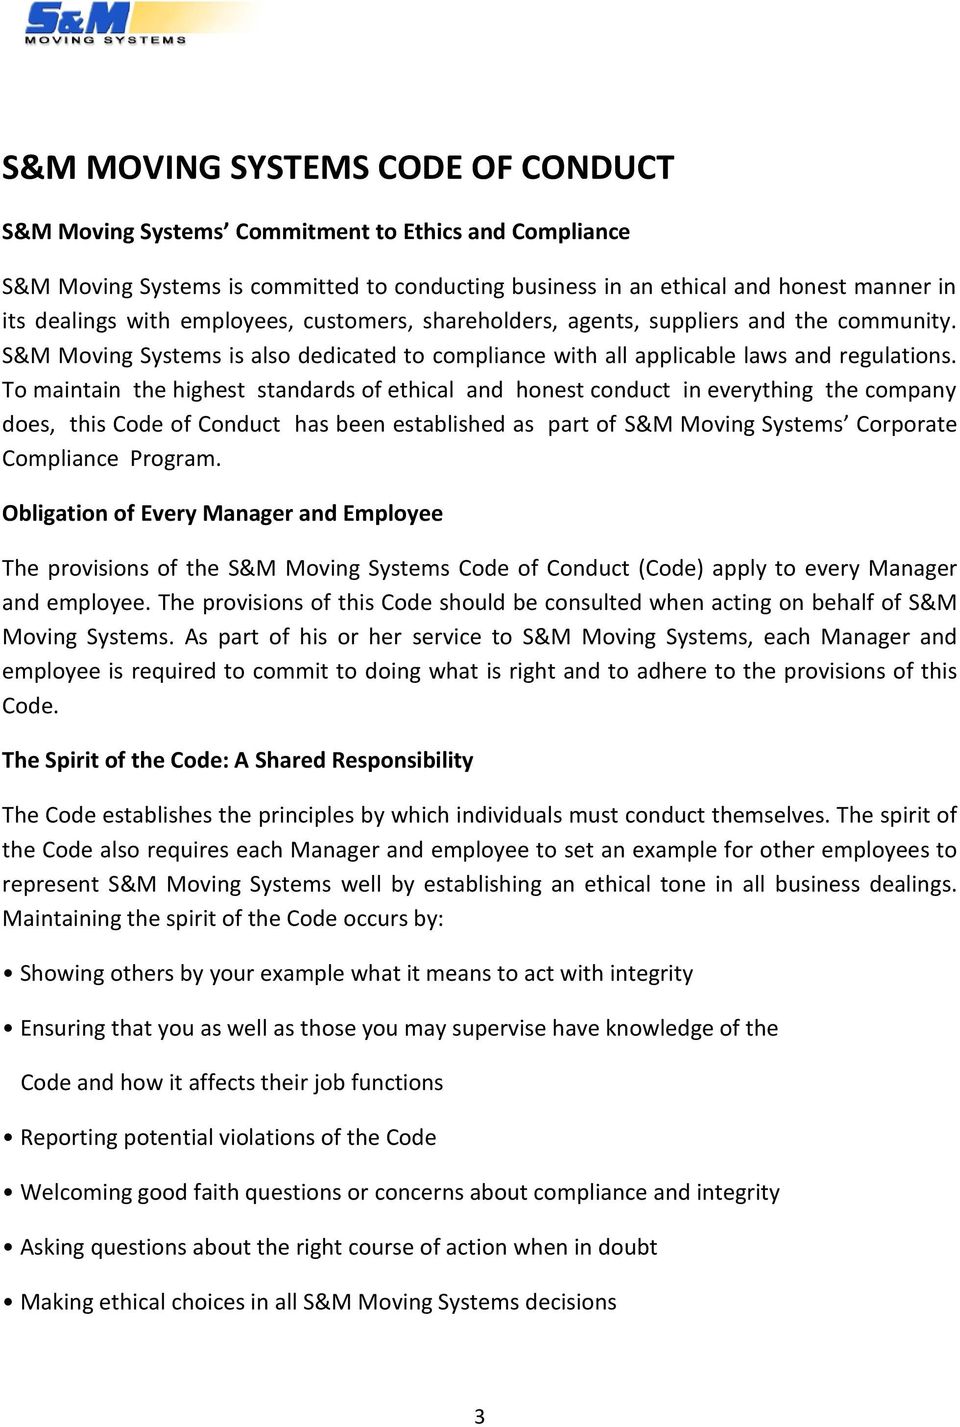 To maintain the highest standards of ethical and honest conduct in everything the company does, this Code of Conduct has been established as part of S&M Moving Systems Corporate Compliance Program.